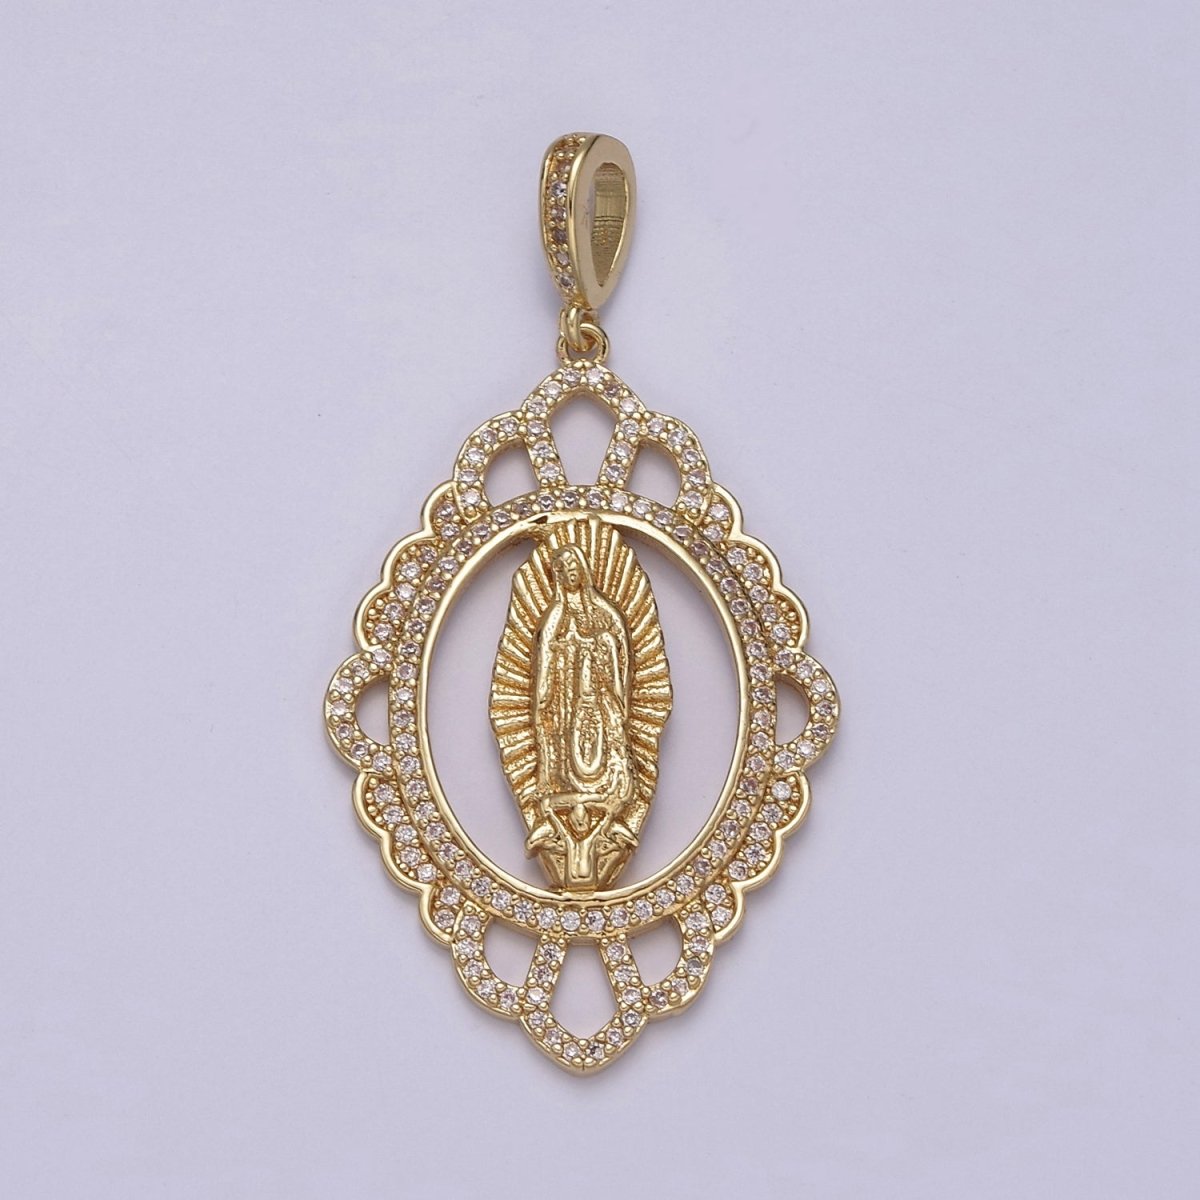 14k Gold Filled Lady Guadalupe Pendant Medallion Cubic Zirconia Charm for Statement Catholic Religious Jewelry Making N-572 - DLUXCA